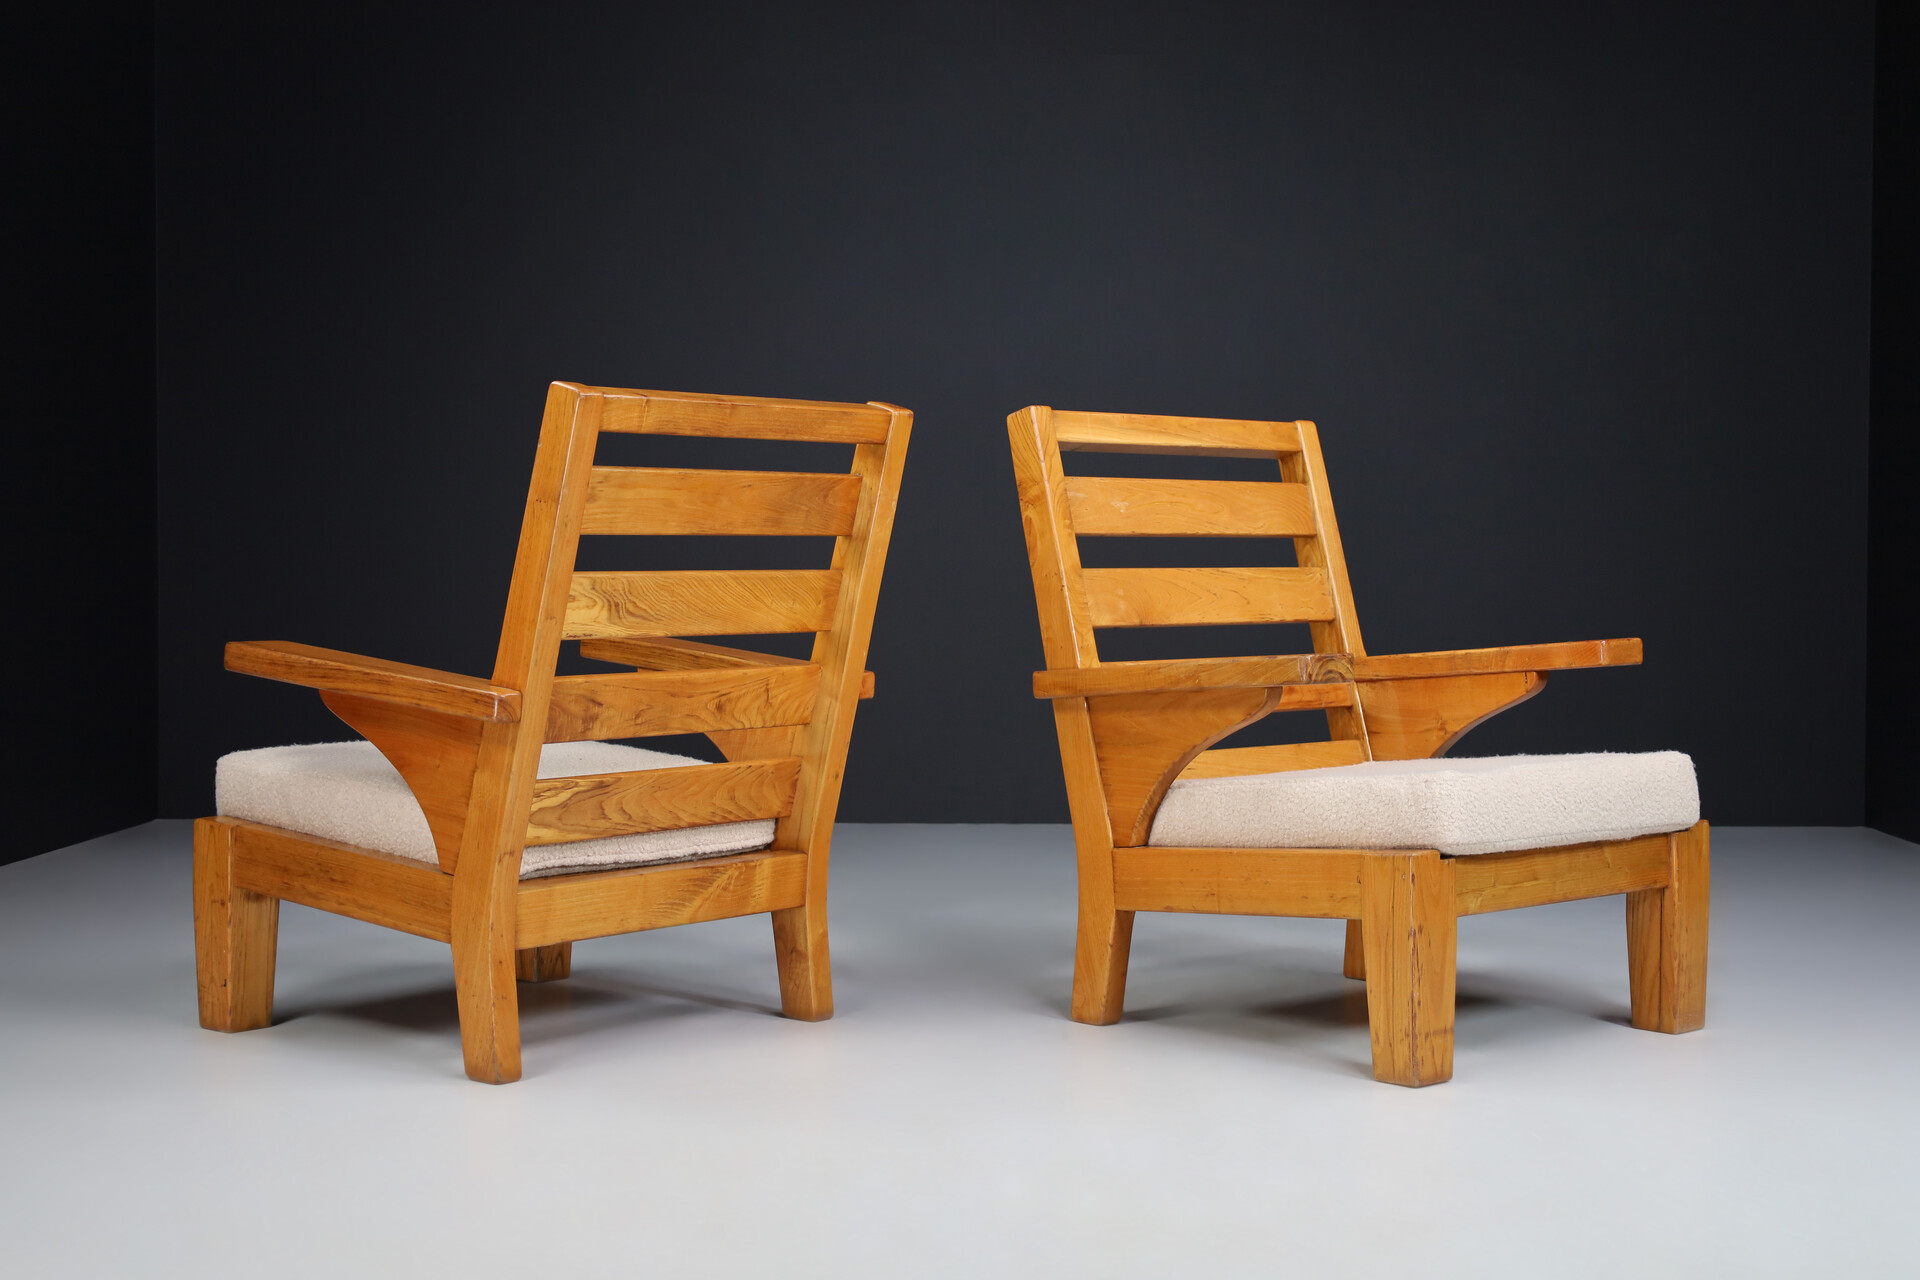 Mid century modern Sculptural lounge Chairs / Arm chairs in oak , Spain 1950s Mid-20th century